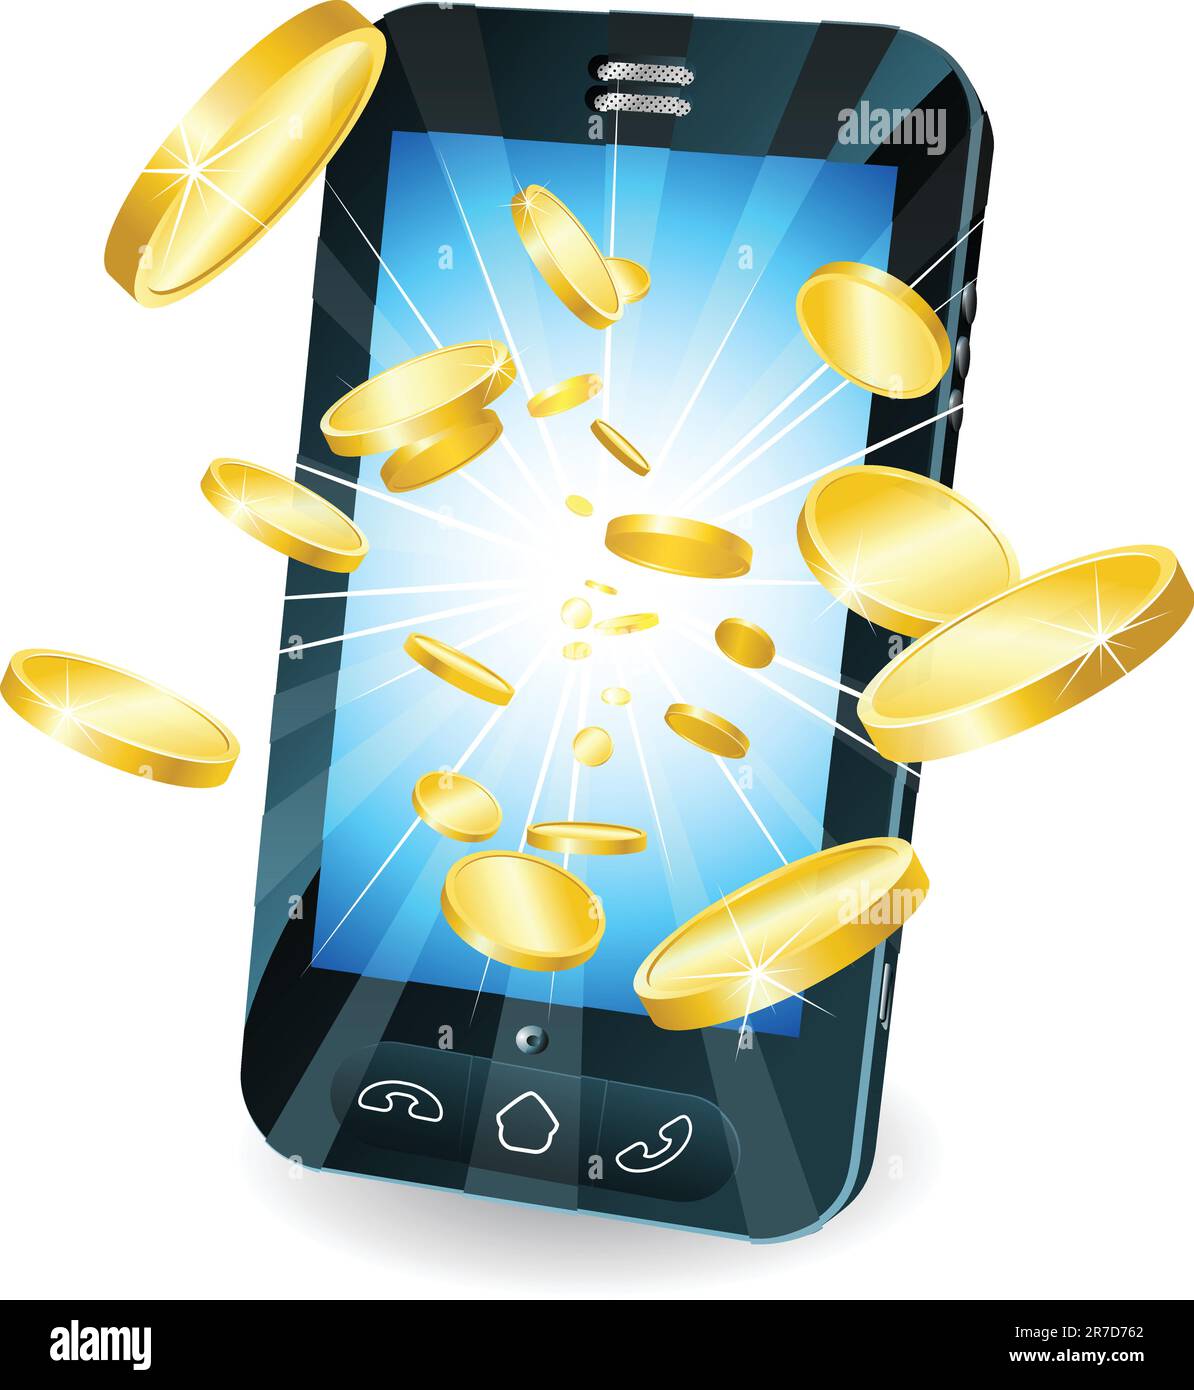 Conceptual illustration. Money in form of gold coins flying out of new style smart mobile phone. Stock Vector